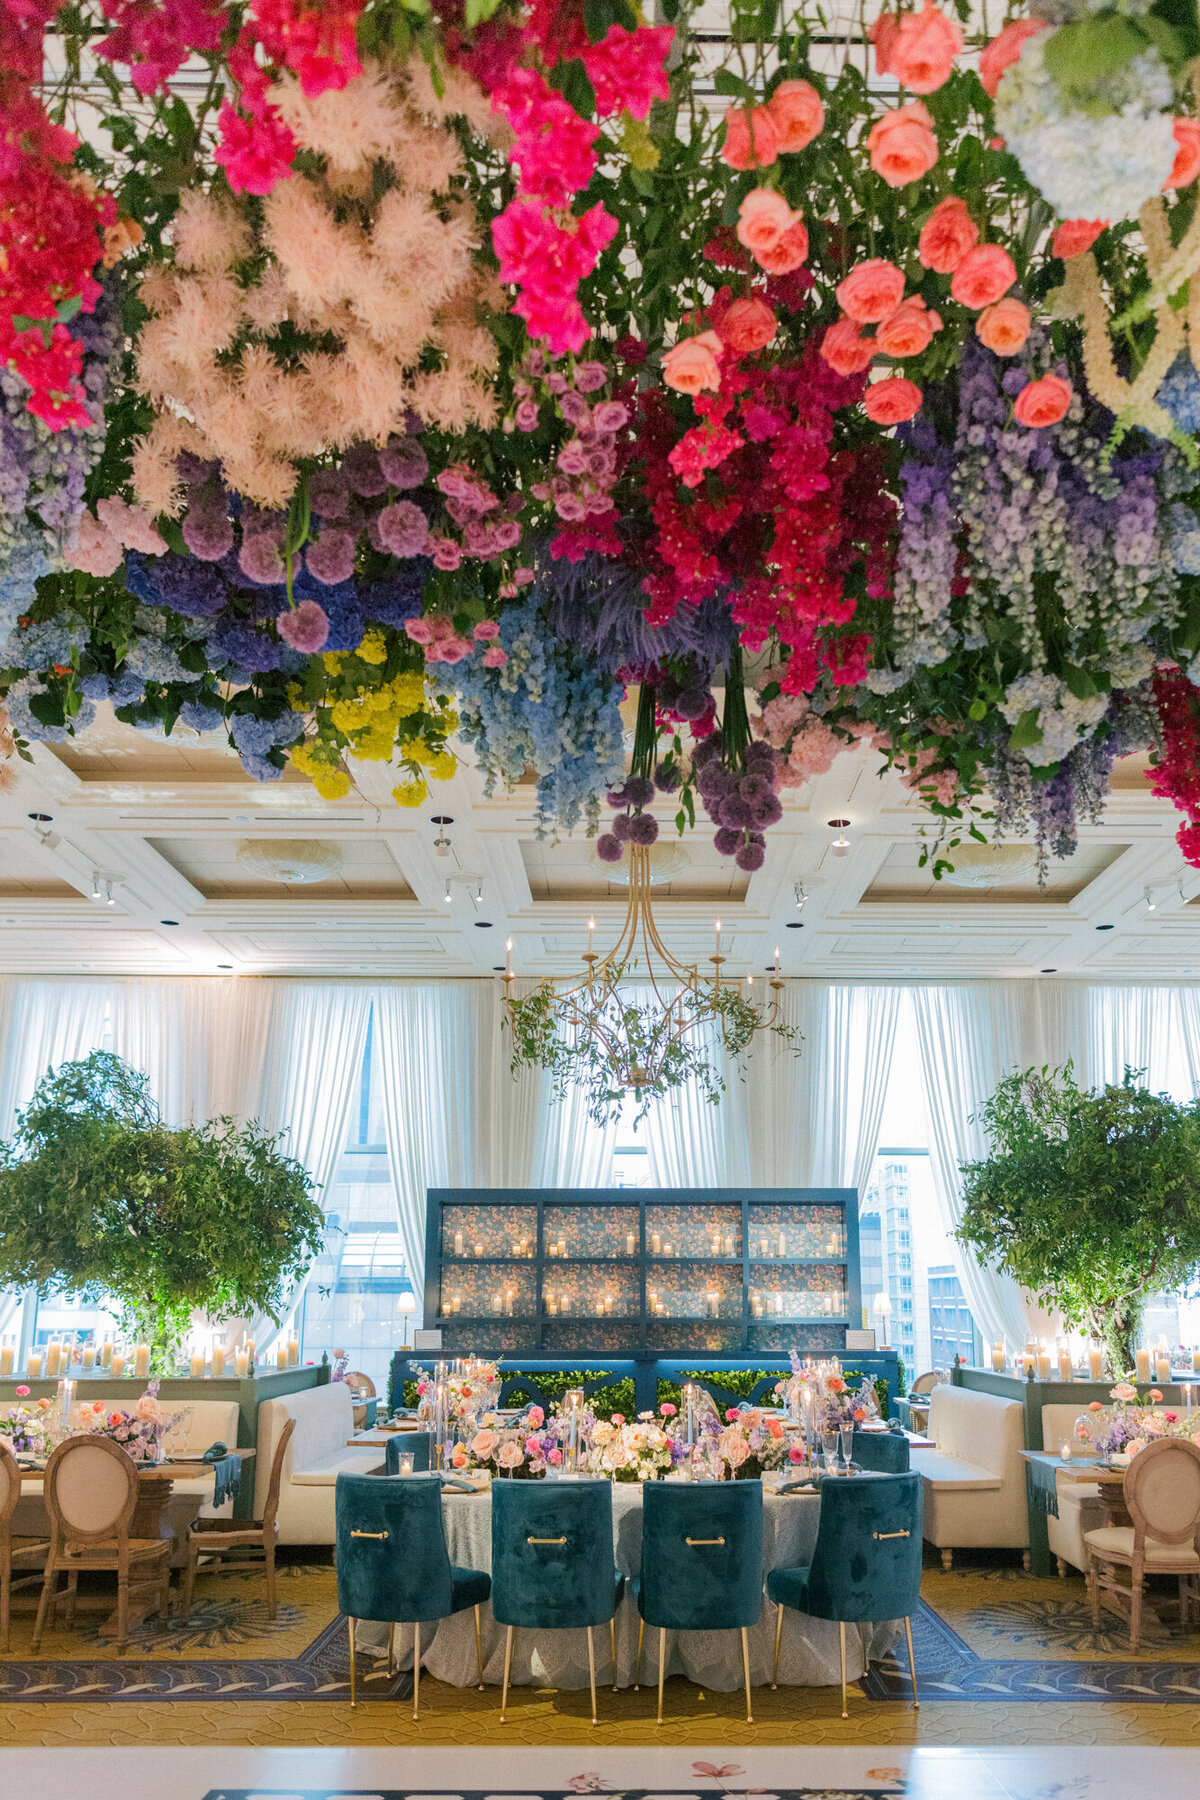 A colorful wedding reception decor photo taken at the Peninsula in Chicago